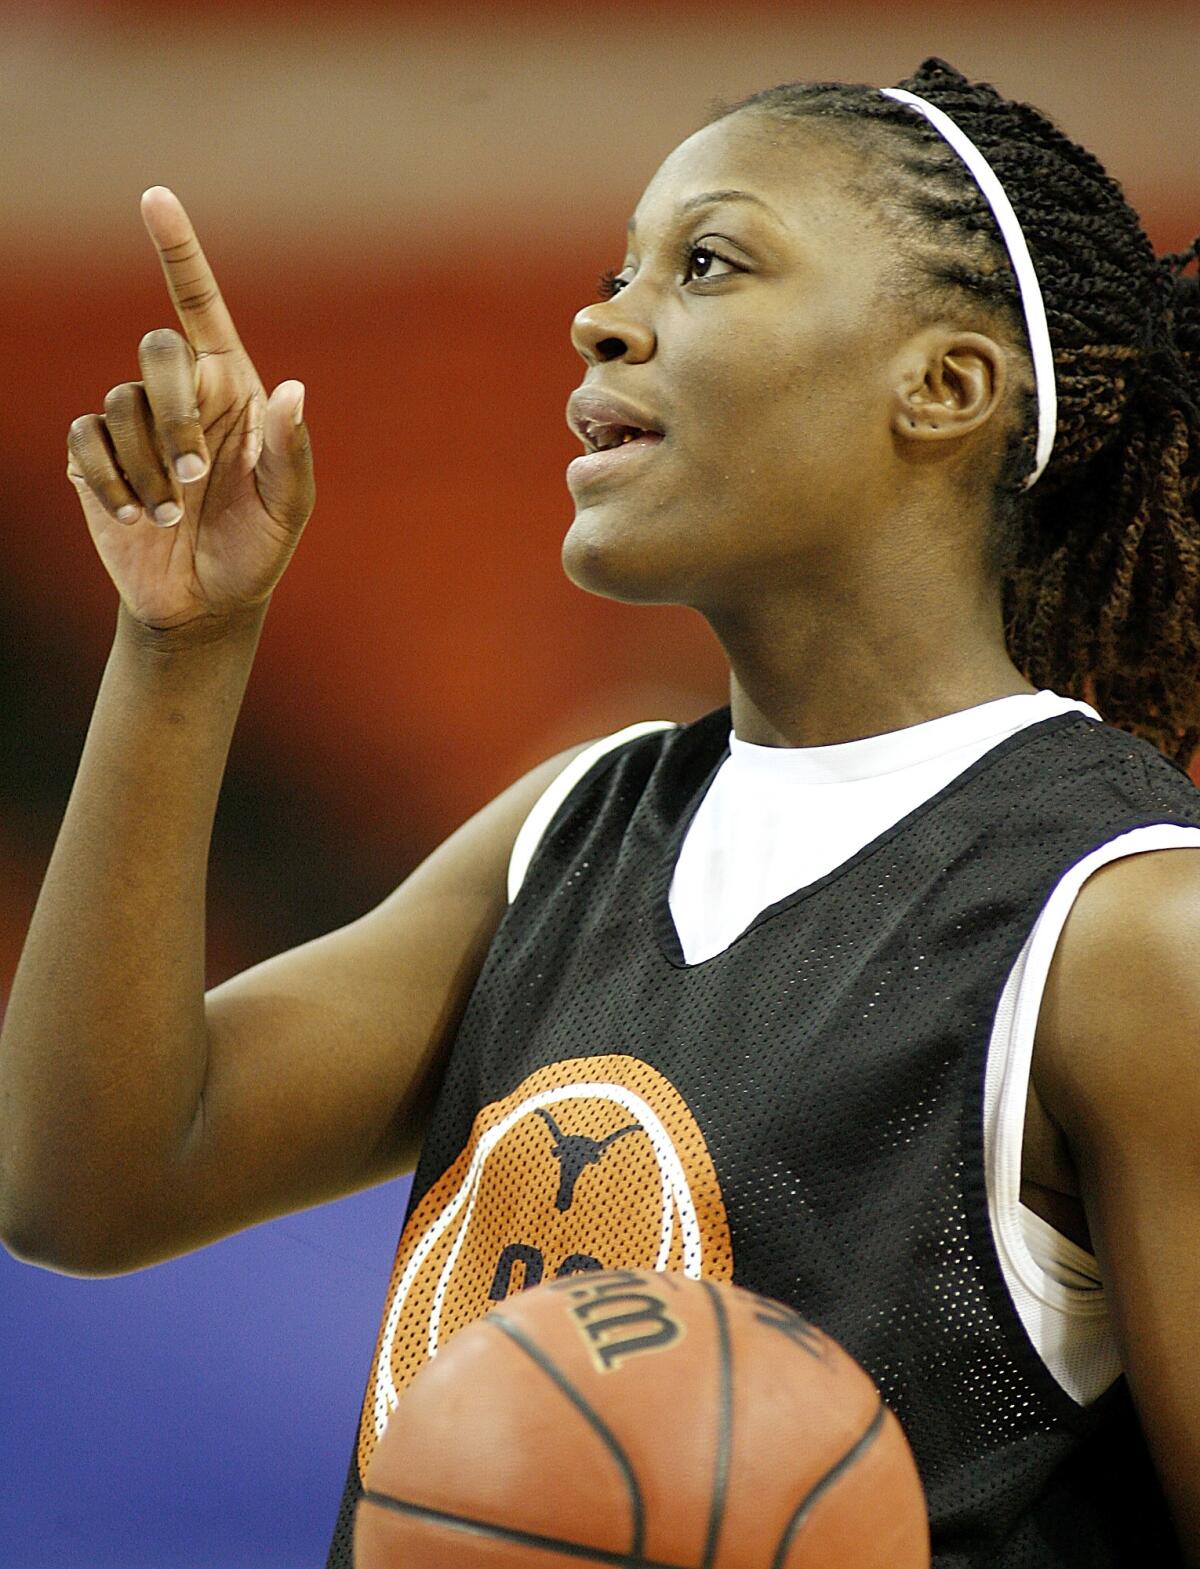 FILE - Texas forward Tiffany Jackson (33) points during Big 12 women's basketball tournament practice Monday, March 5, 2007 in Oklahoma City, Okla. Jackson, a former standout at the University of Texas who was the No. 5 pick in the WNBA draft in 2007 and played nine years in the league, has died of cancer, the school announced. She was 37. Jackson, who was first diagnosed with breast cancer in 2015, died Monday, Oct. 3, 2022. (AP Photo/Ty Russell)